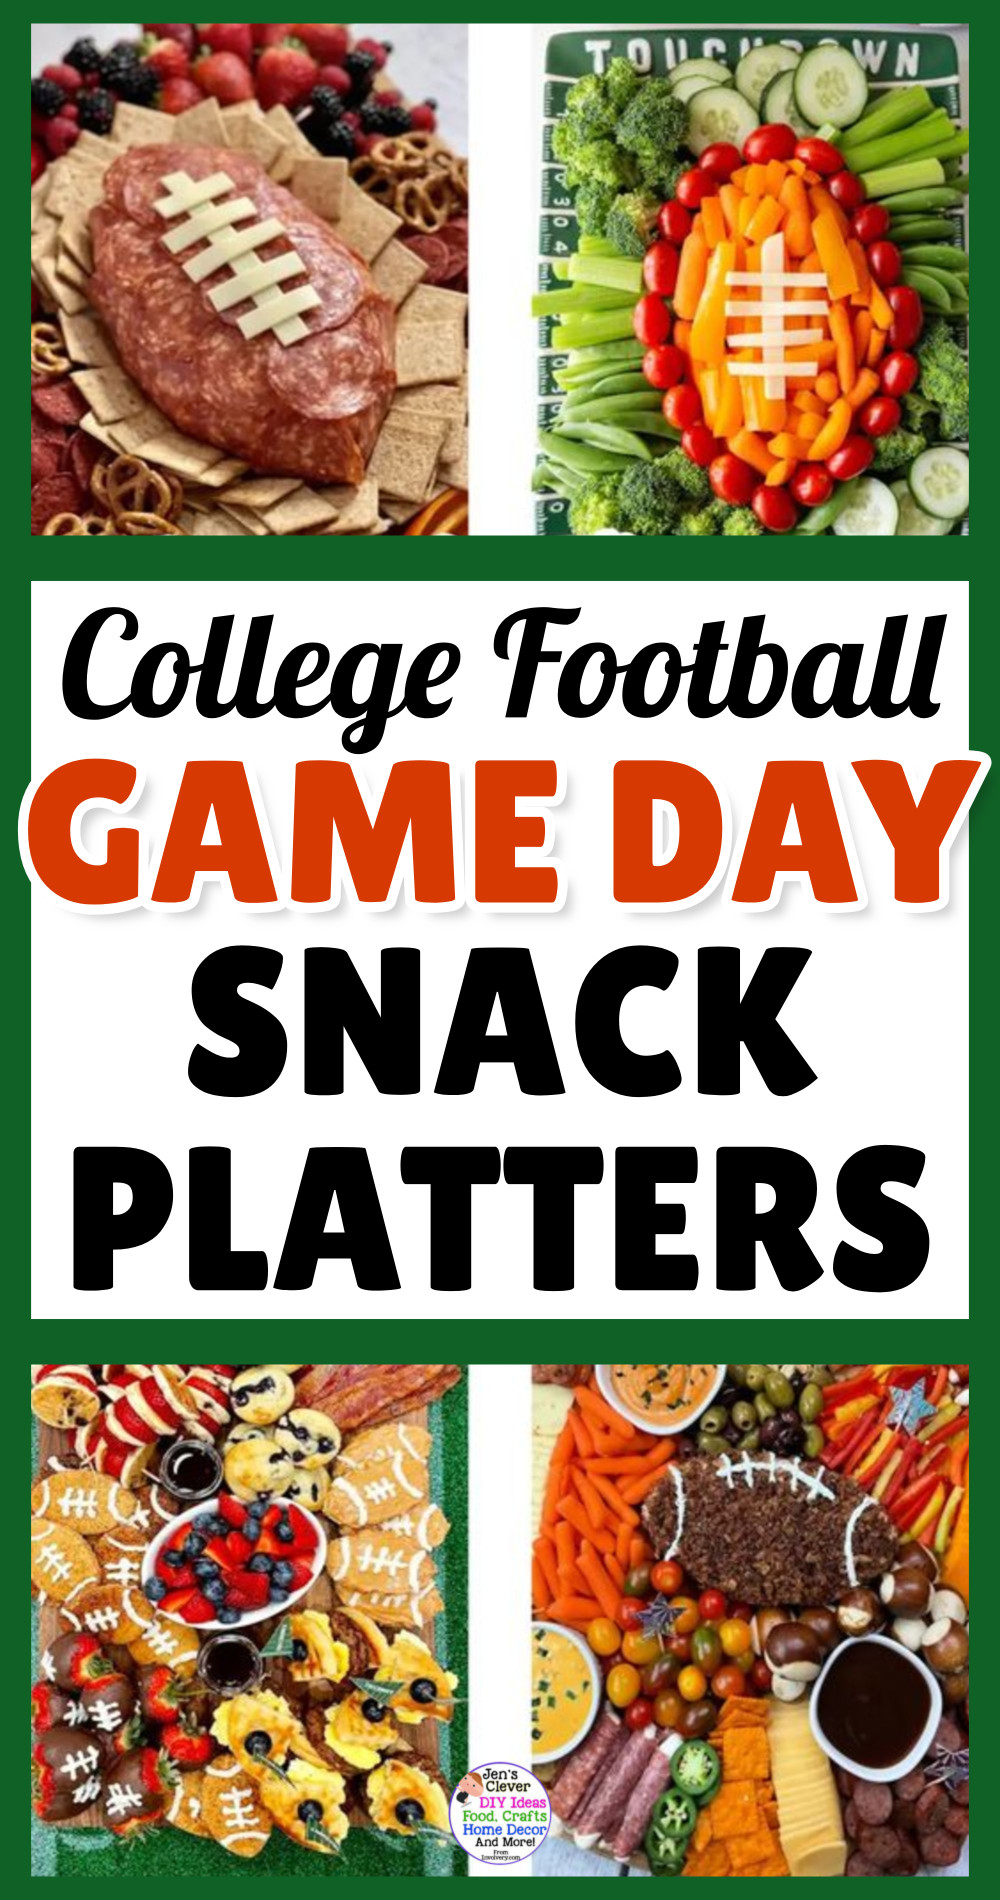 College Football Game Day Snack Platters